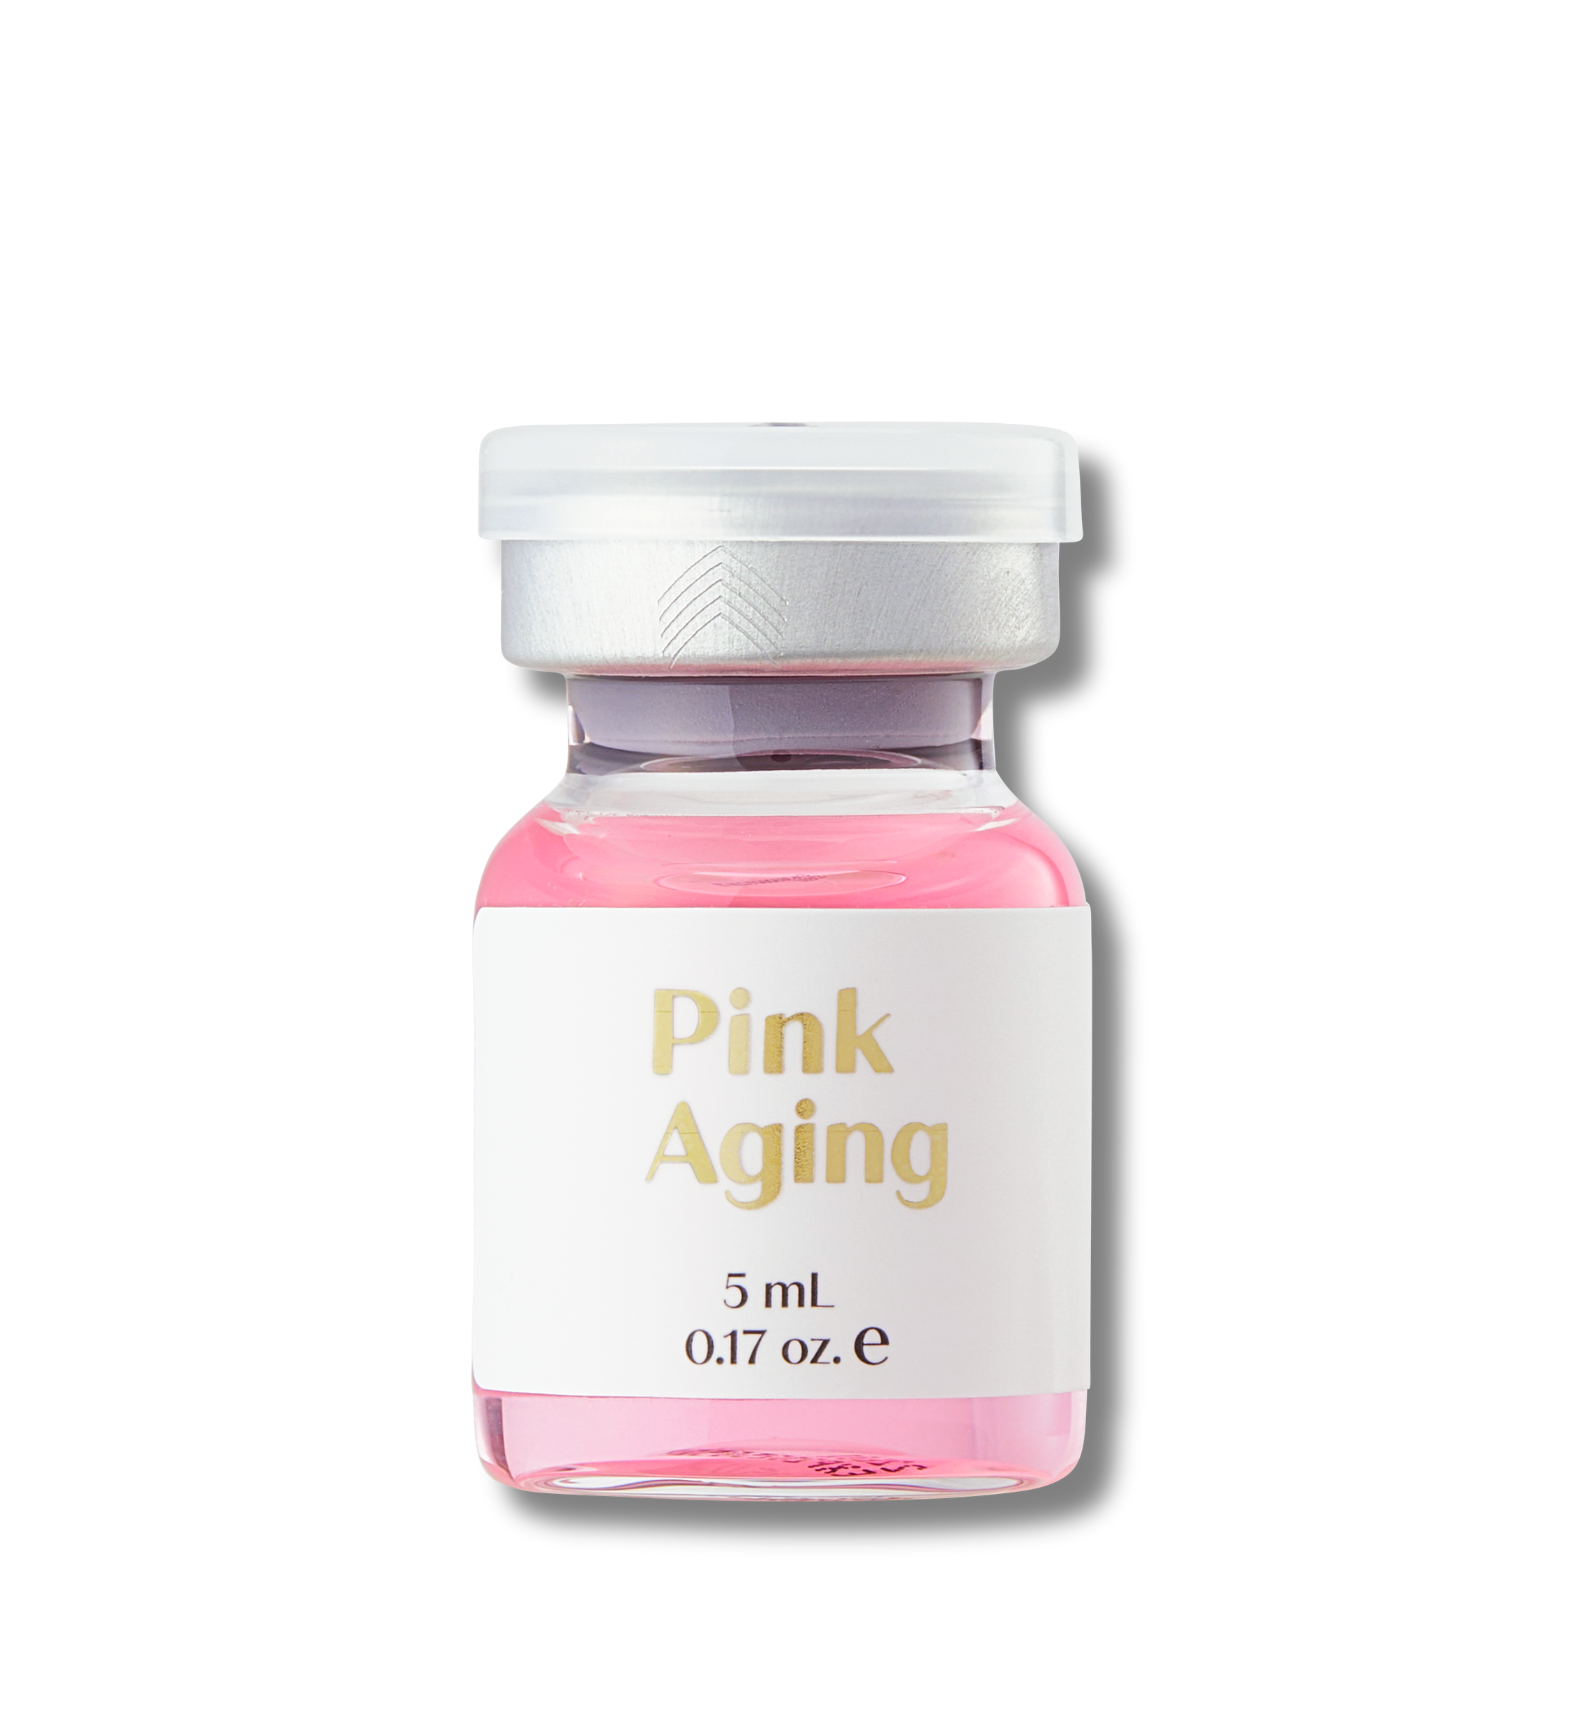 Ribeskin pink aging solution in vial for anti aging treatment at dermatologist clinic or medical aesthetic clinic